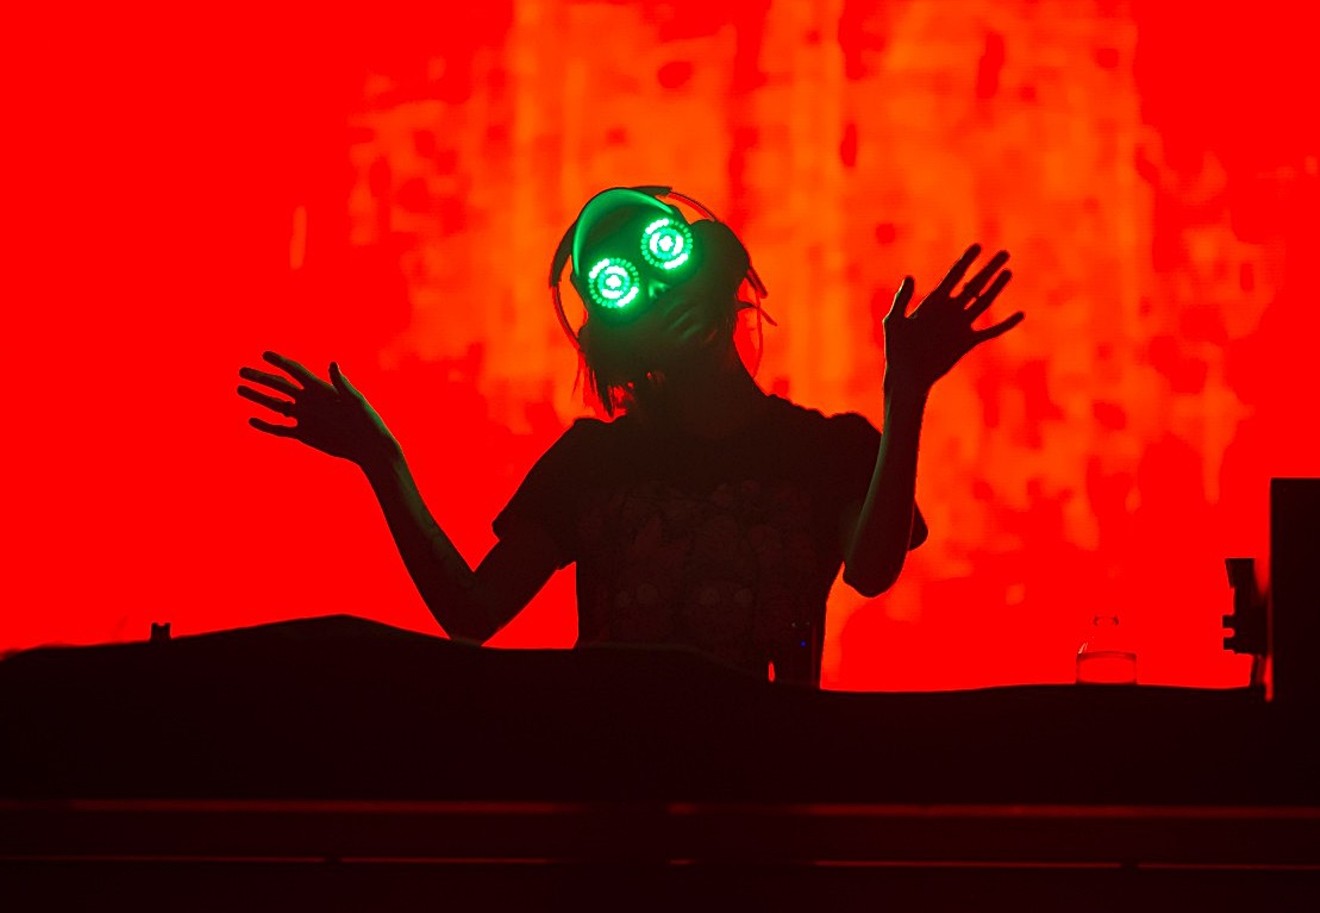 DJ/producer REZZ is scheduled to perform on Saturday, July 3, at Rawhide Event Center in Chandler.